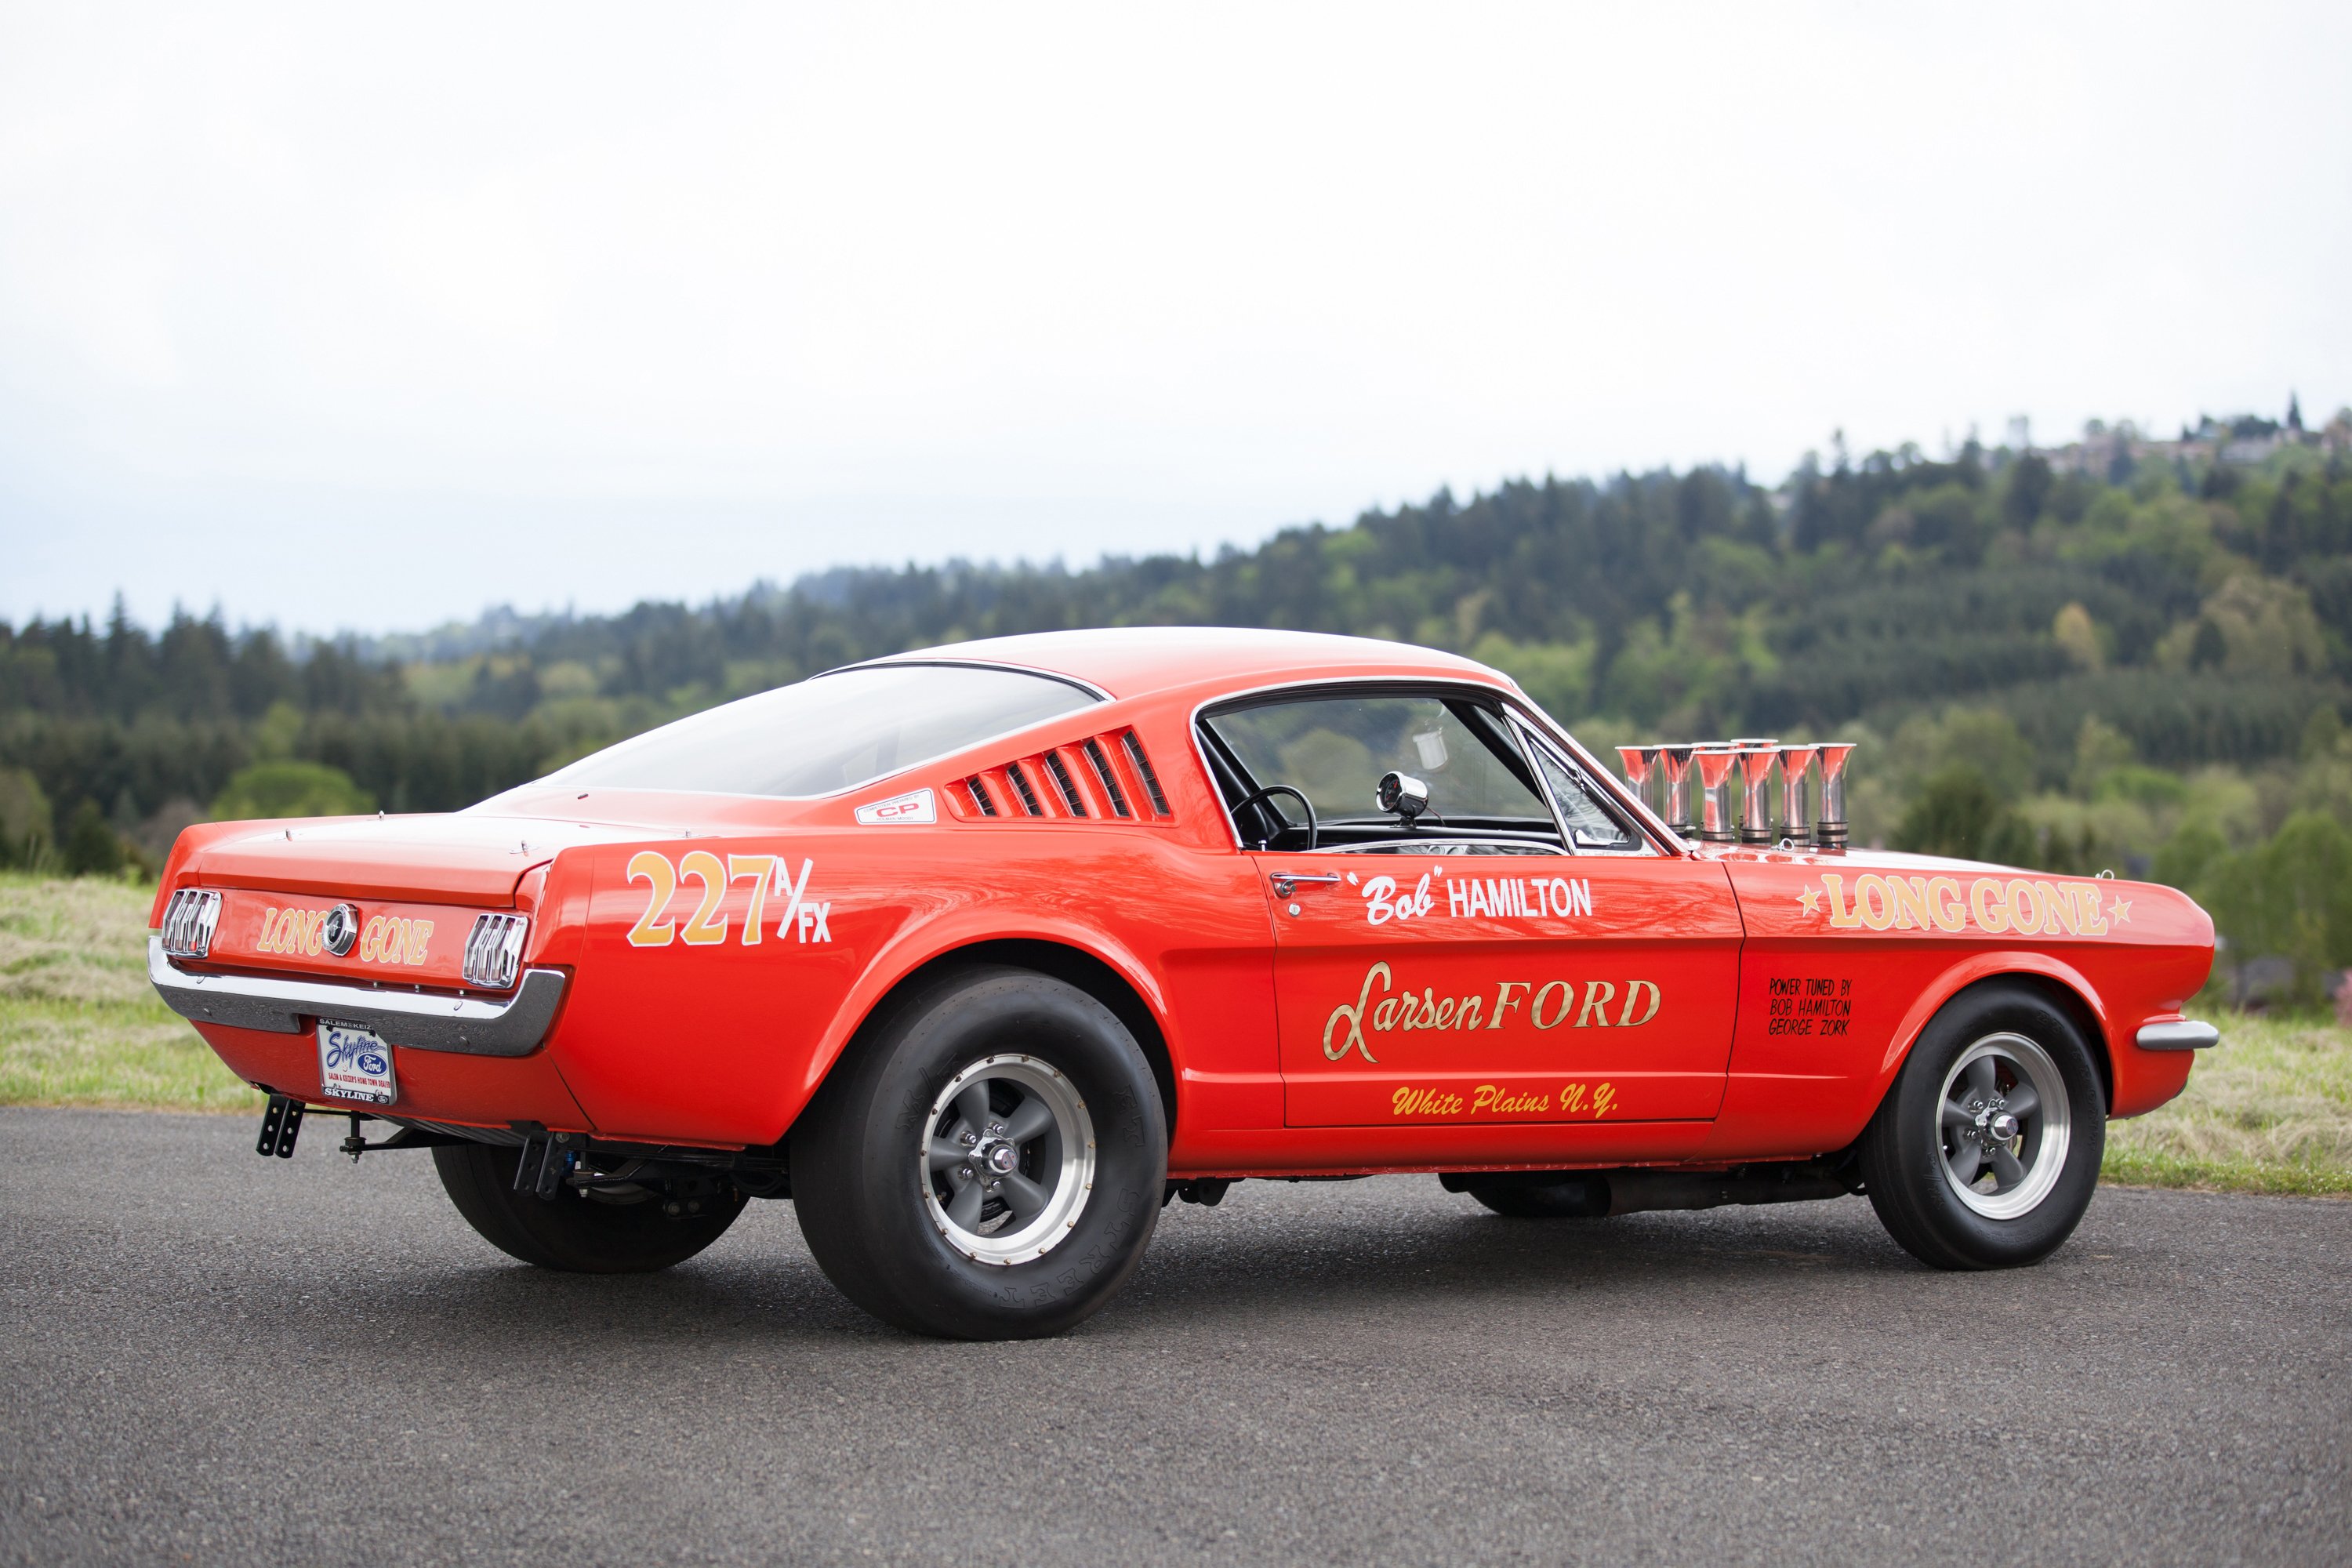 1965, Ford, Mustang, A fx, Holman, Moody, Prostock, Drag, Dragster, Race, Car, Usa,  07 Wallpaper